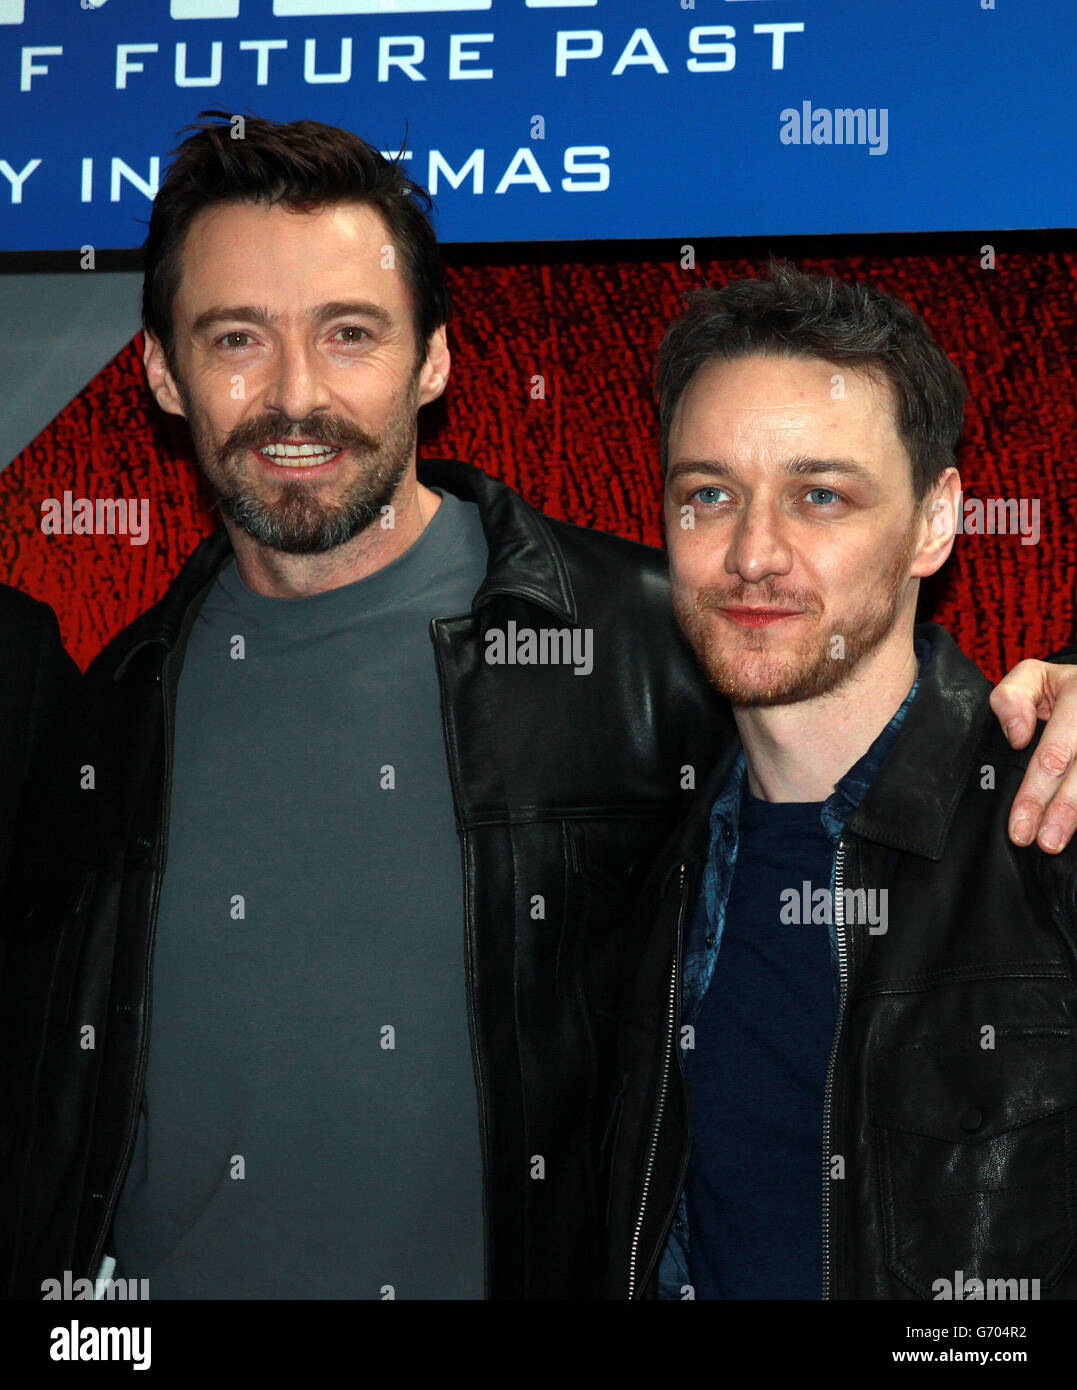 Hugh Jackman (left) and James McAvoy name a Virgin train at Euston station in London to celebrate Virgin Trains partnership with Twentieth Century Fox Film Corporation to be the official travel partner of X-MEN: Days of Future Past. Stock Photo